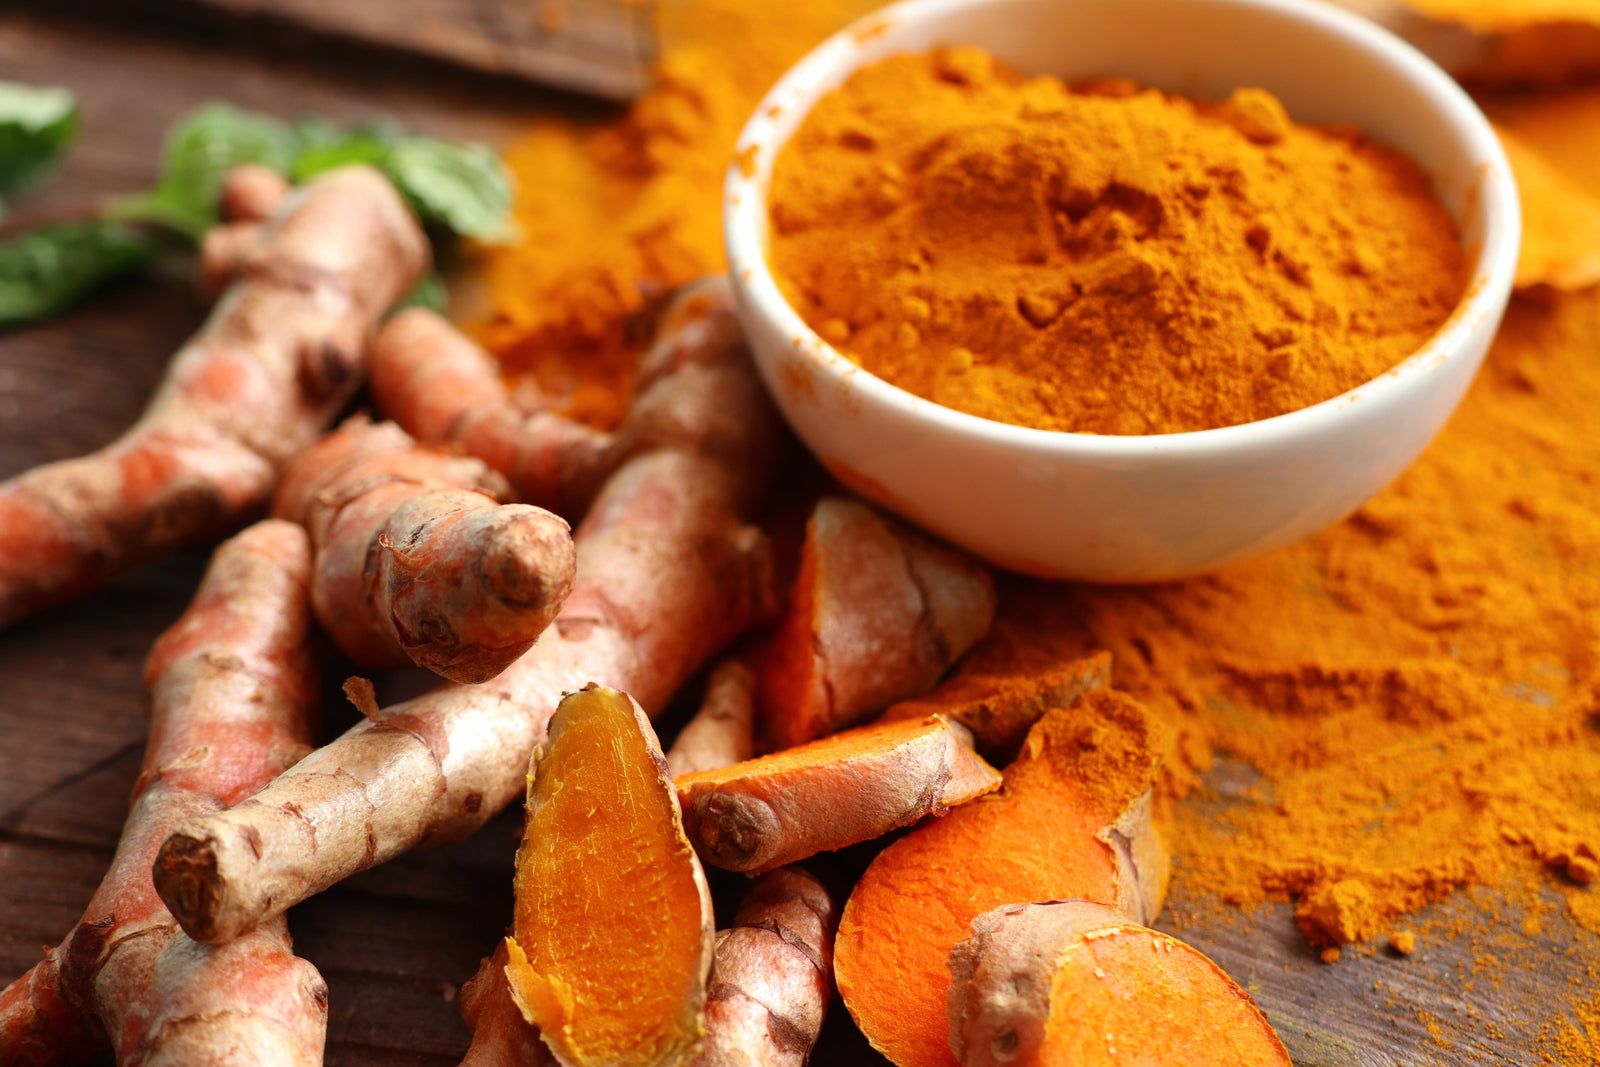 Does Turmeric Change the Colour of Your Urine?